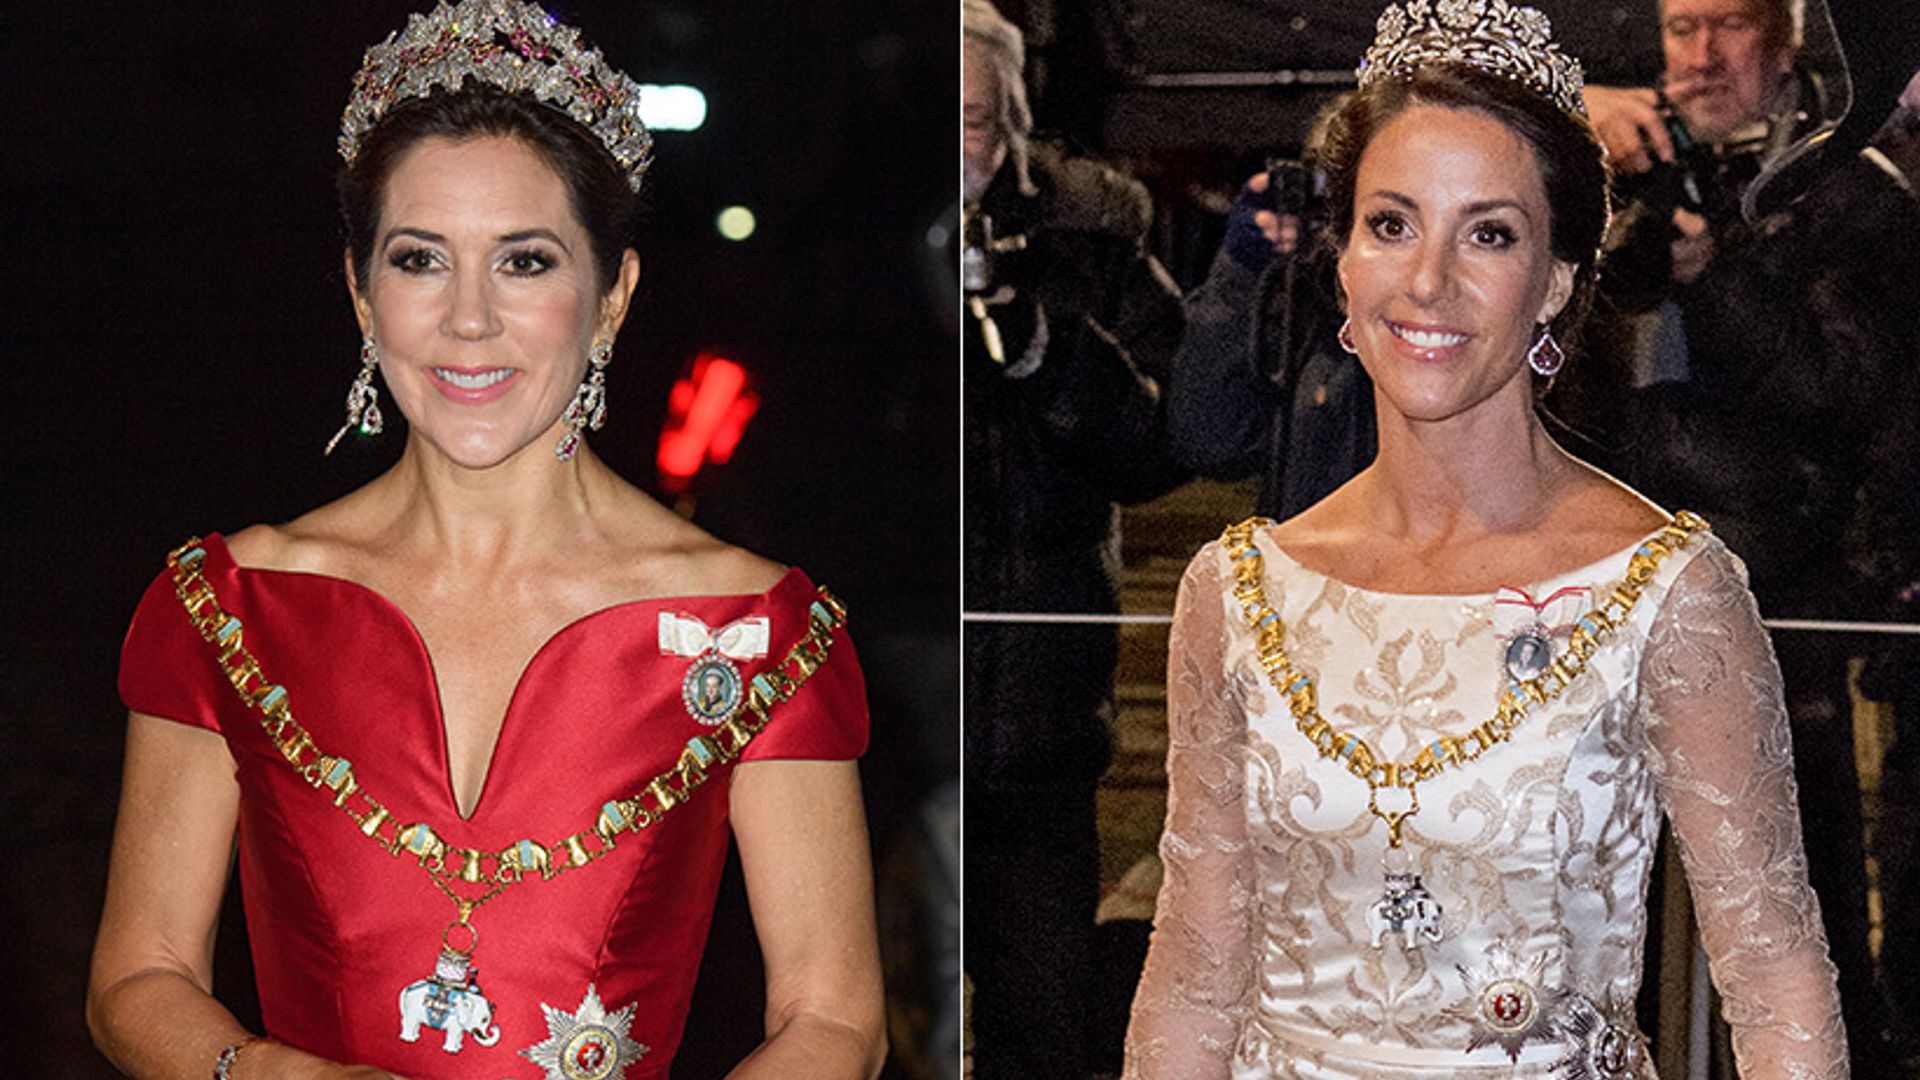 Princesses Mary and Marie of Denmark top style stakes at New Year's bash